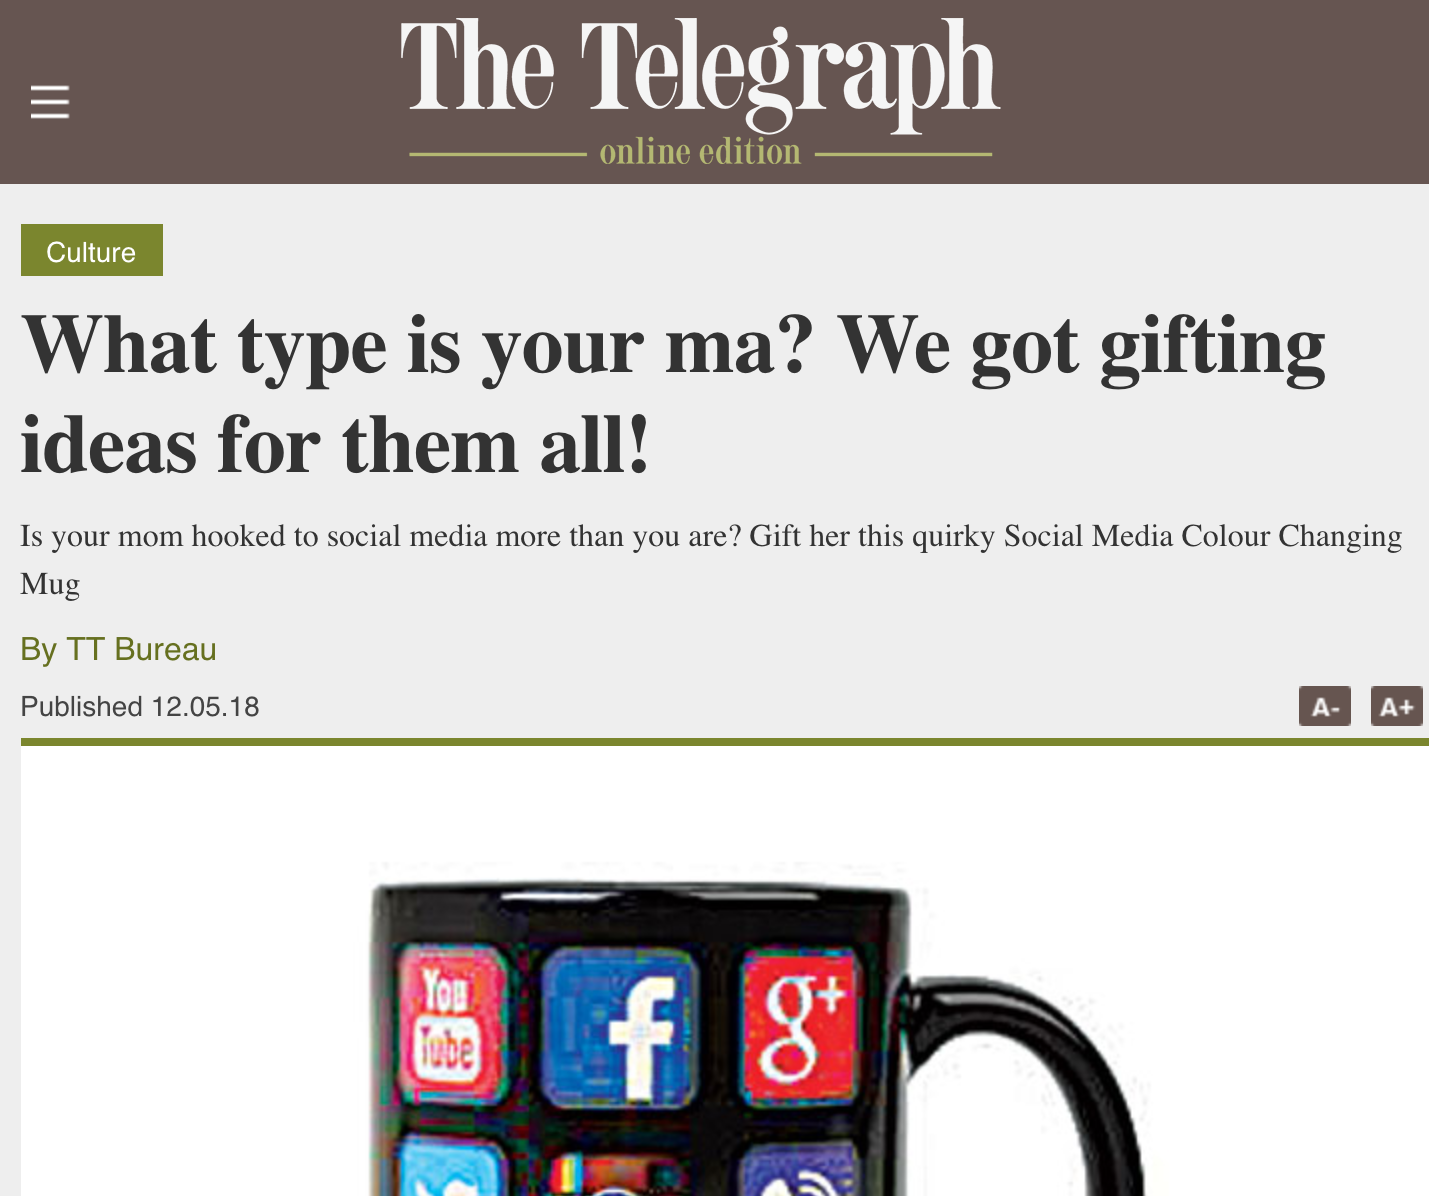 The Telegraph | What type is your ma? We got gifting ideas for them all!